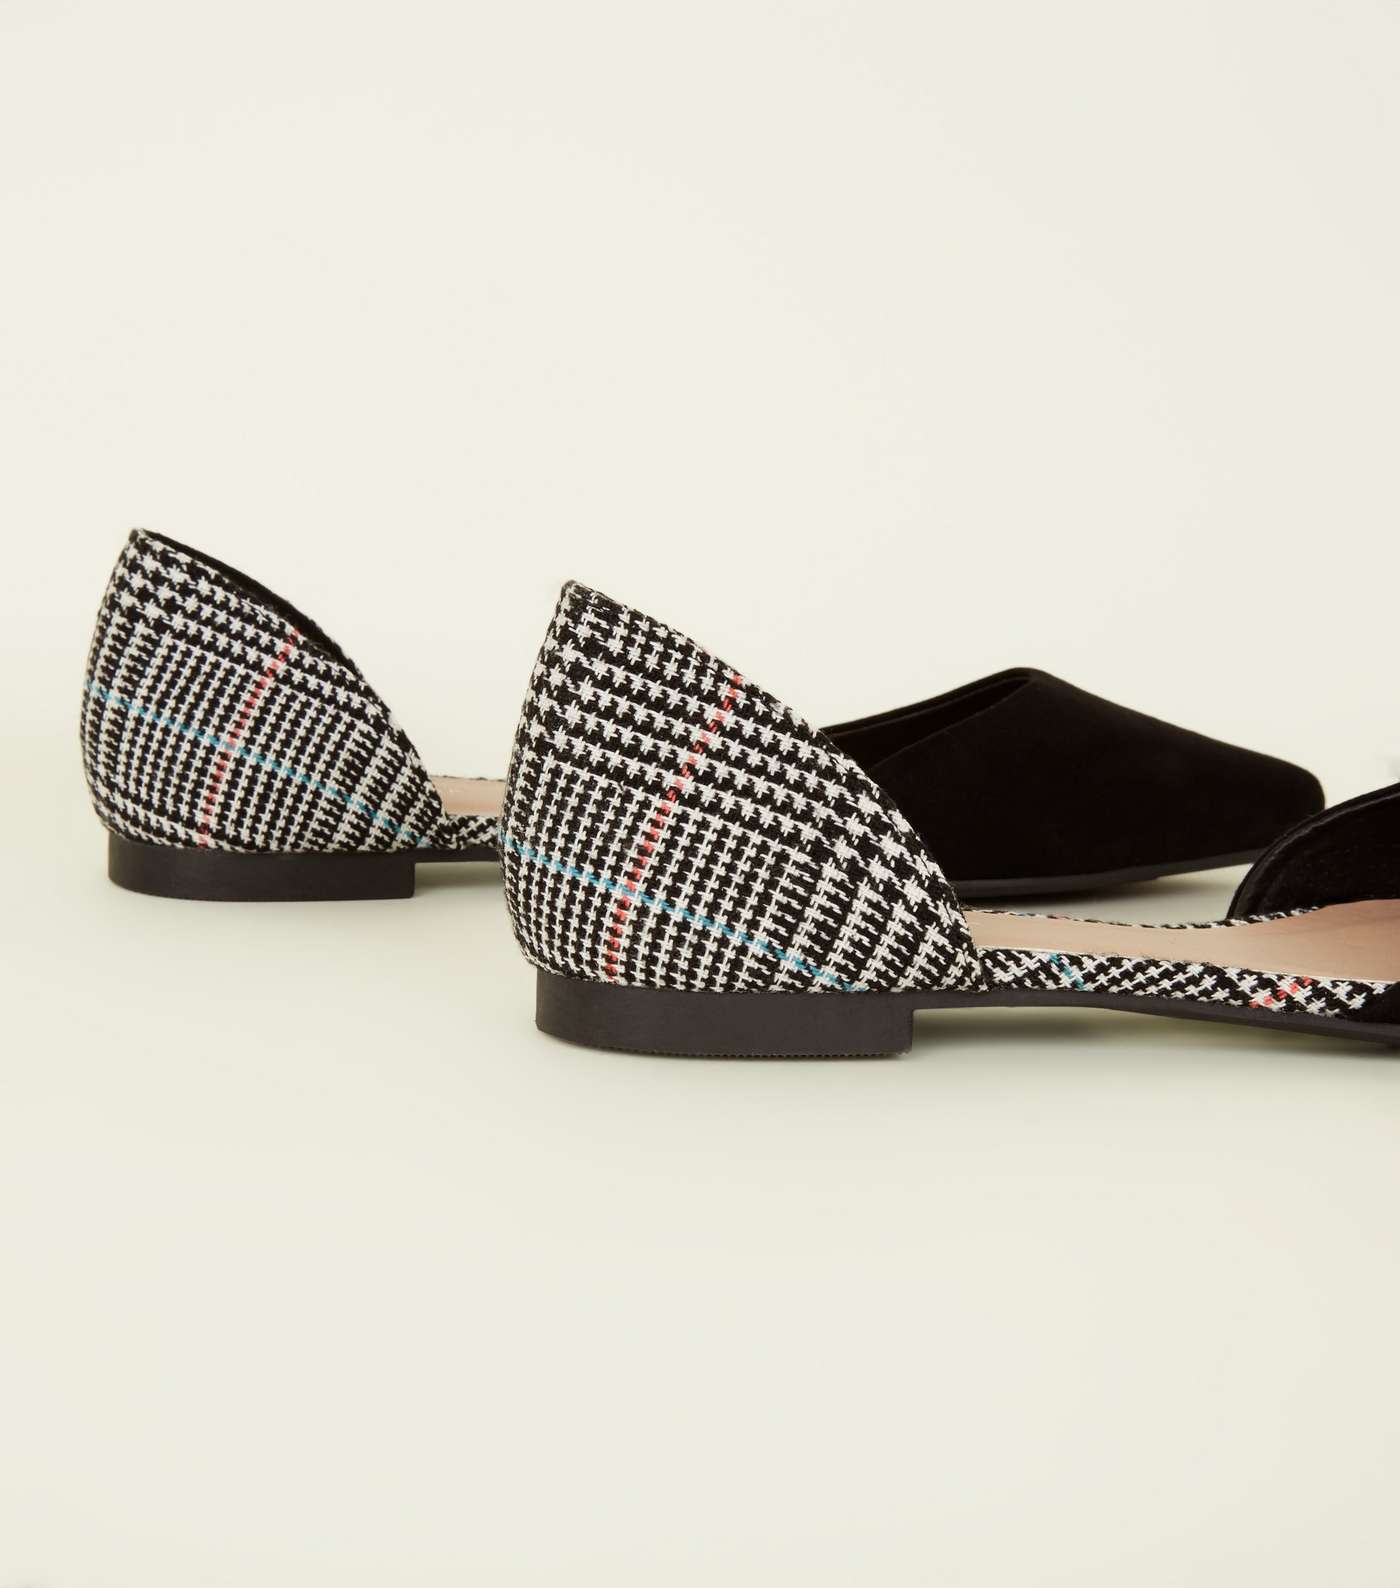 Black Woven Houndstooth Pointed Ballet Pumps Image 3